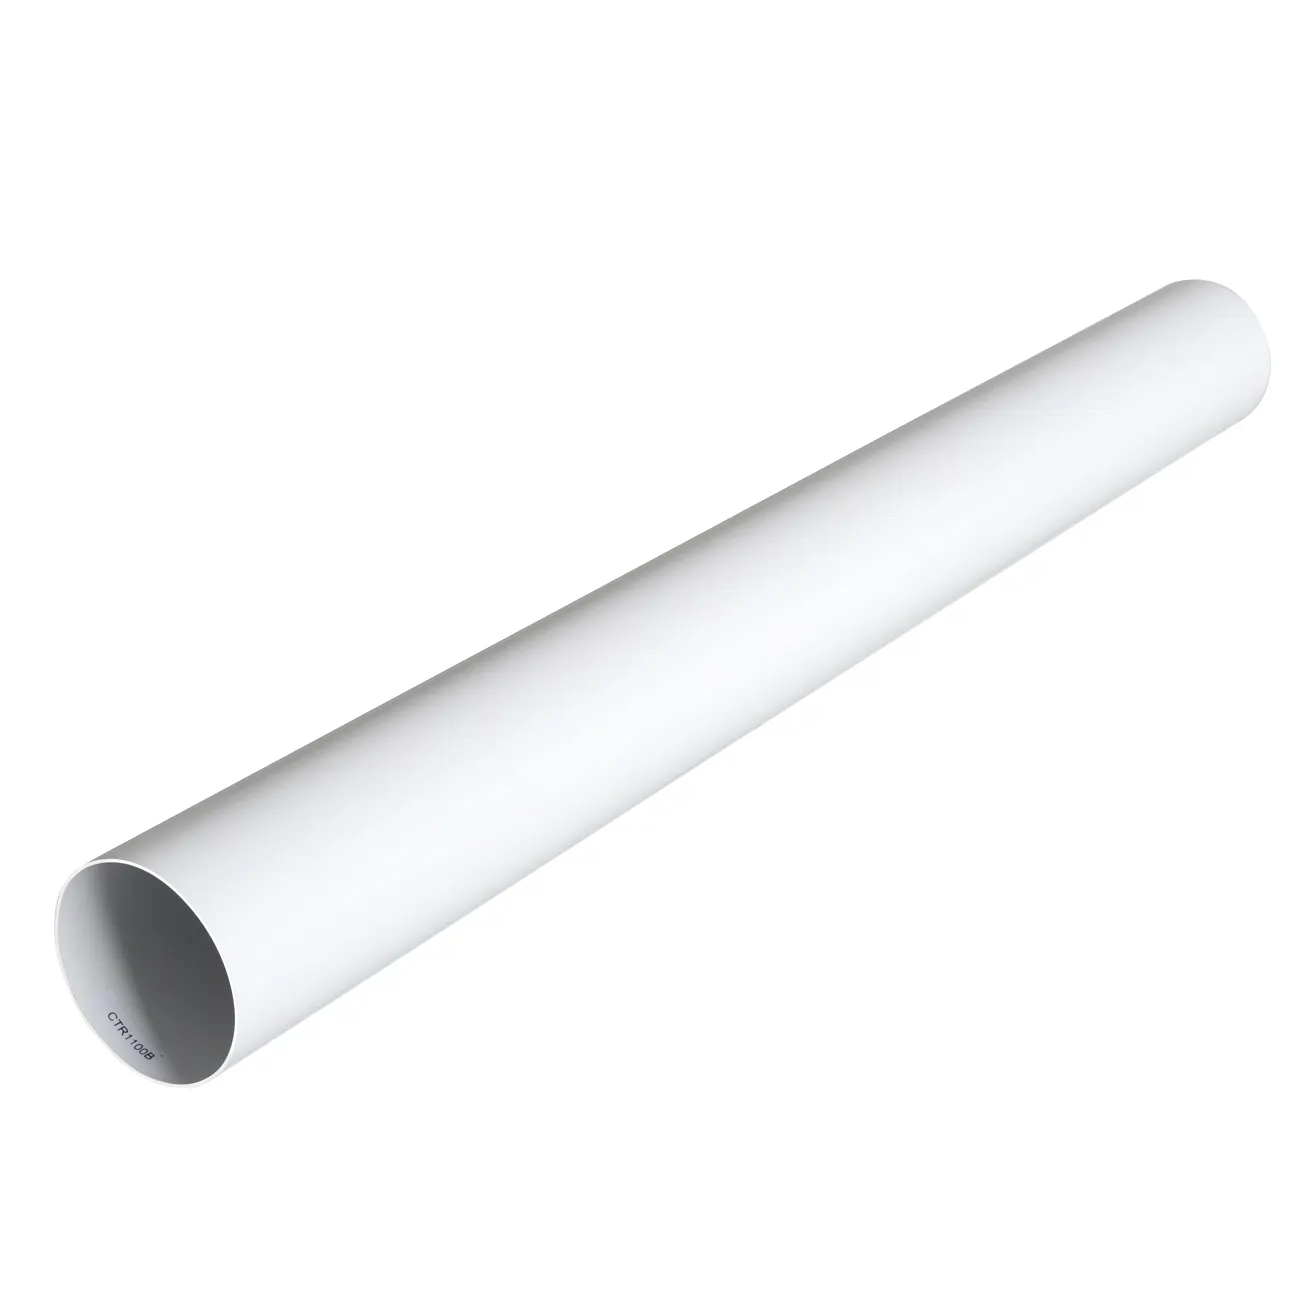 PVC Plastic HVAC Systems Parts Tube Round Pipe For Duct Ventilation For Apartment Villa Kitchen